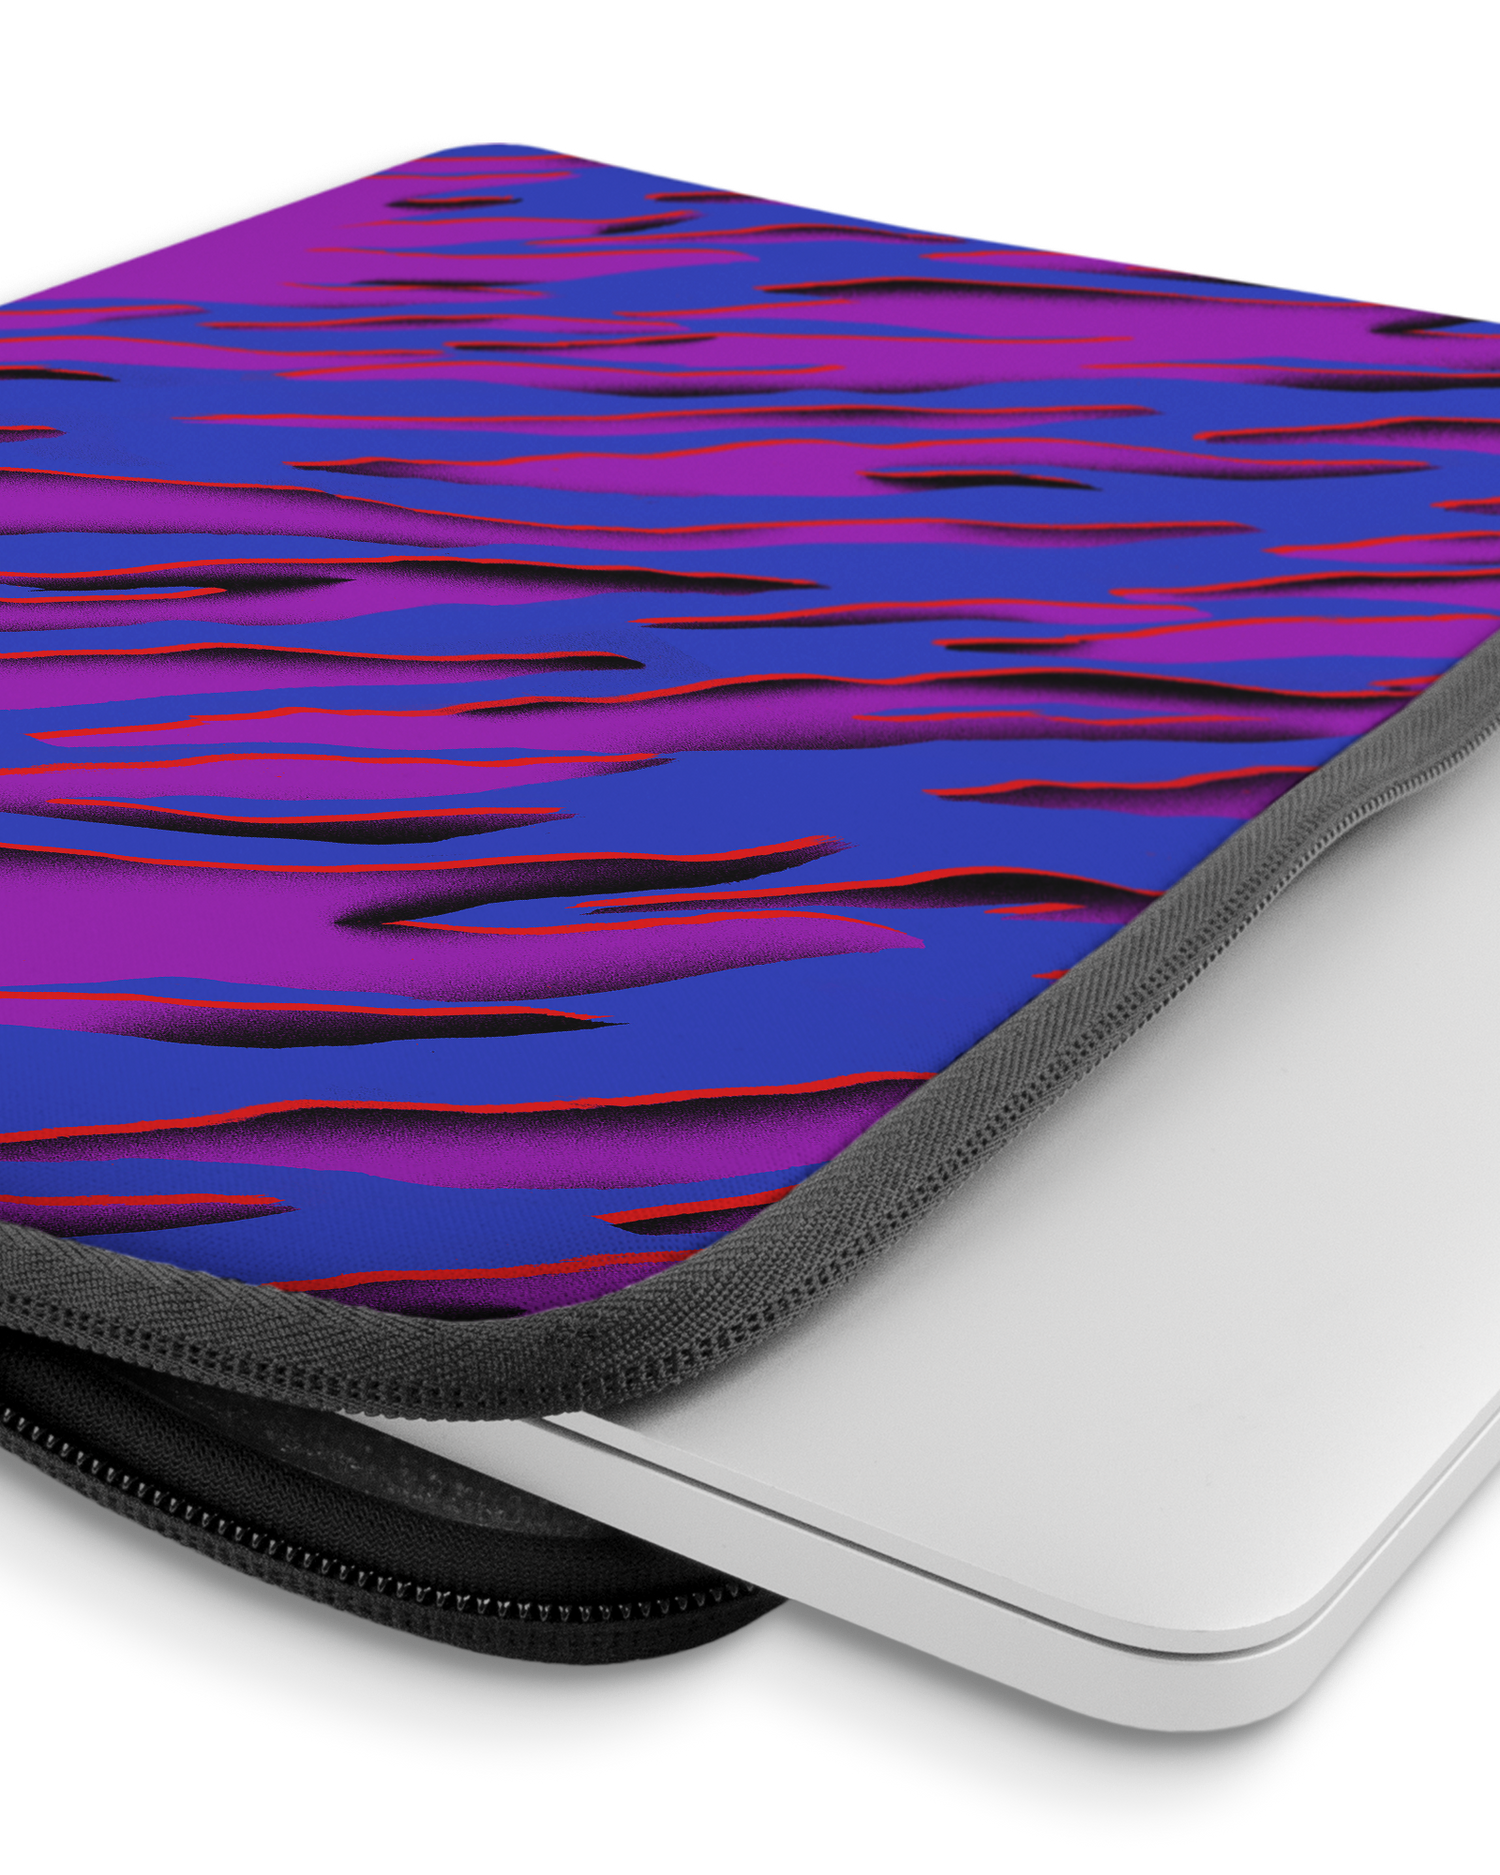 Electric Ocean 2 Laptop Case 14 inch with device inside